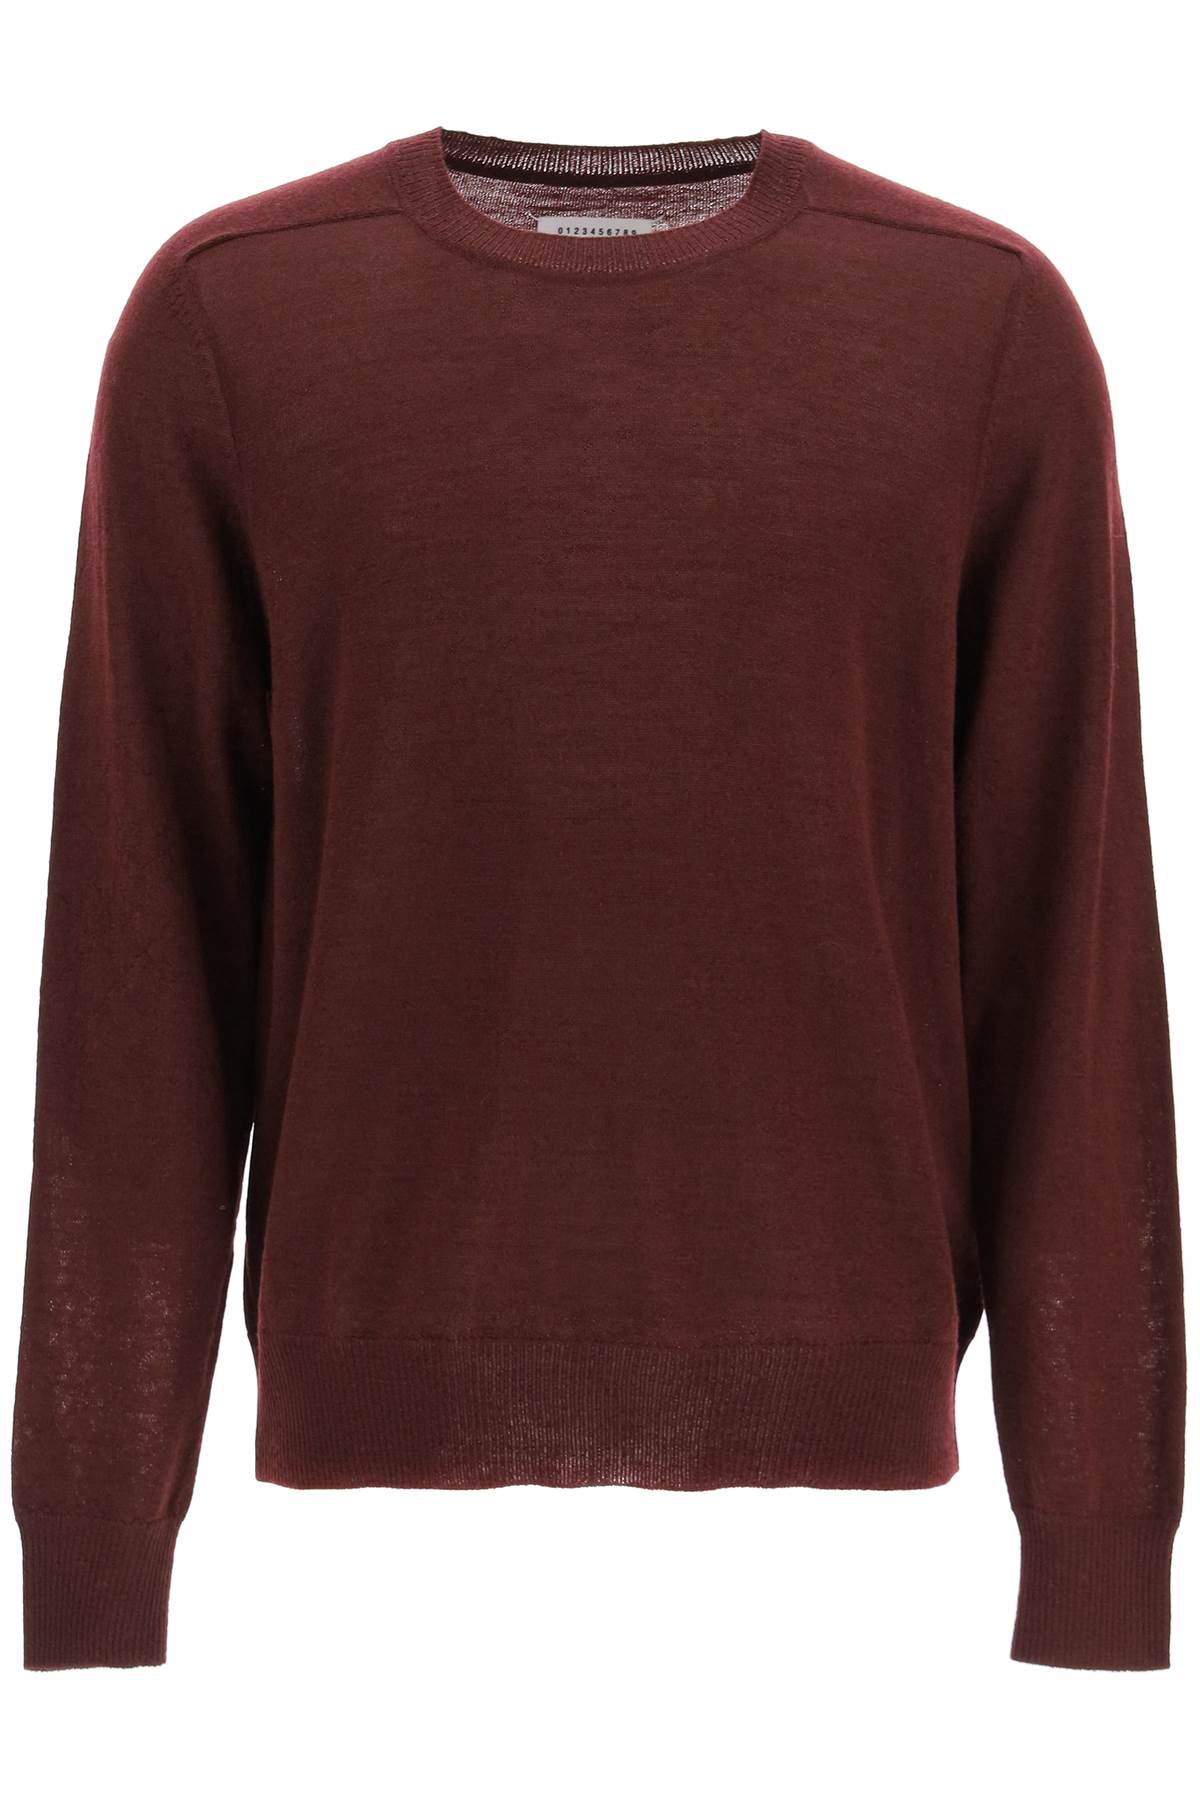 Maison Margiela Crew Neck Sweater With Elbow Patches